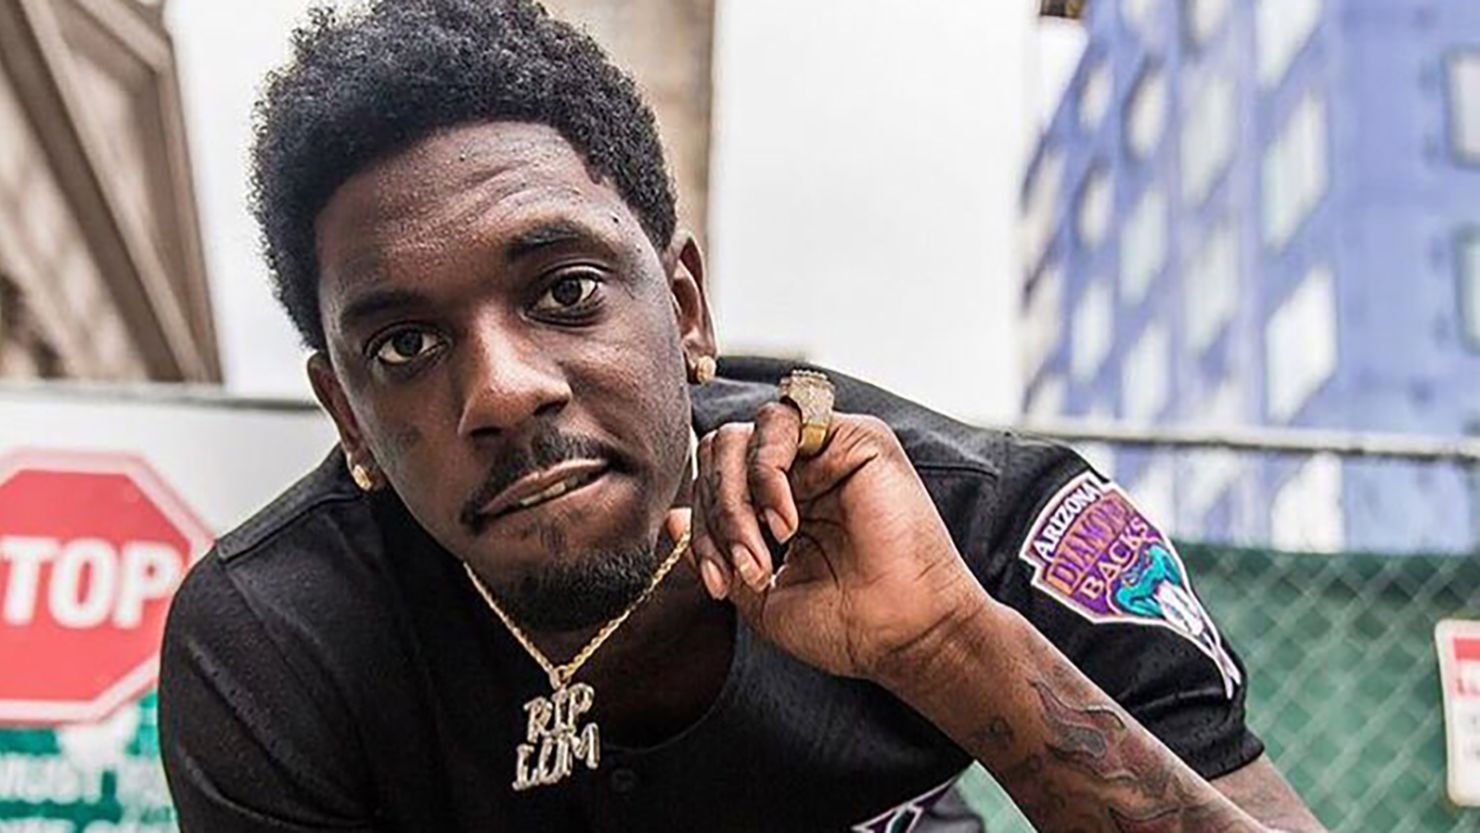 Rapper Jimmy Wopo and another man were found shot Monday in a vehicle in Pittsburgh. 